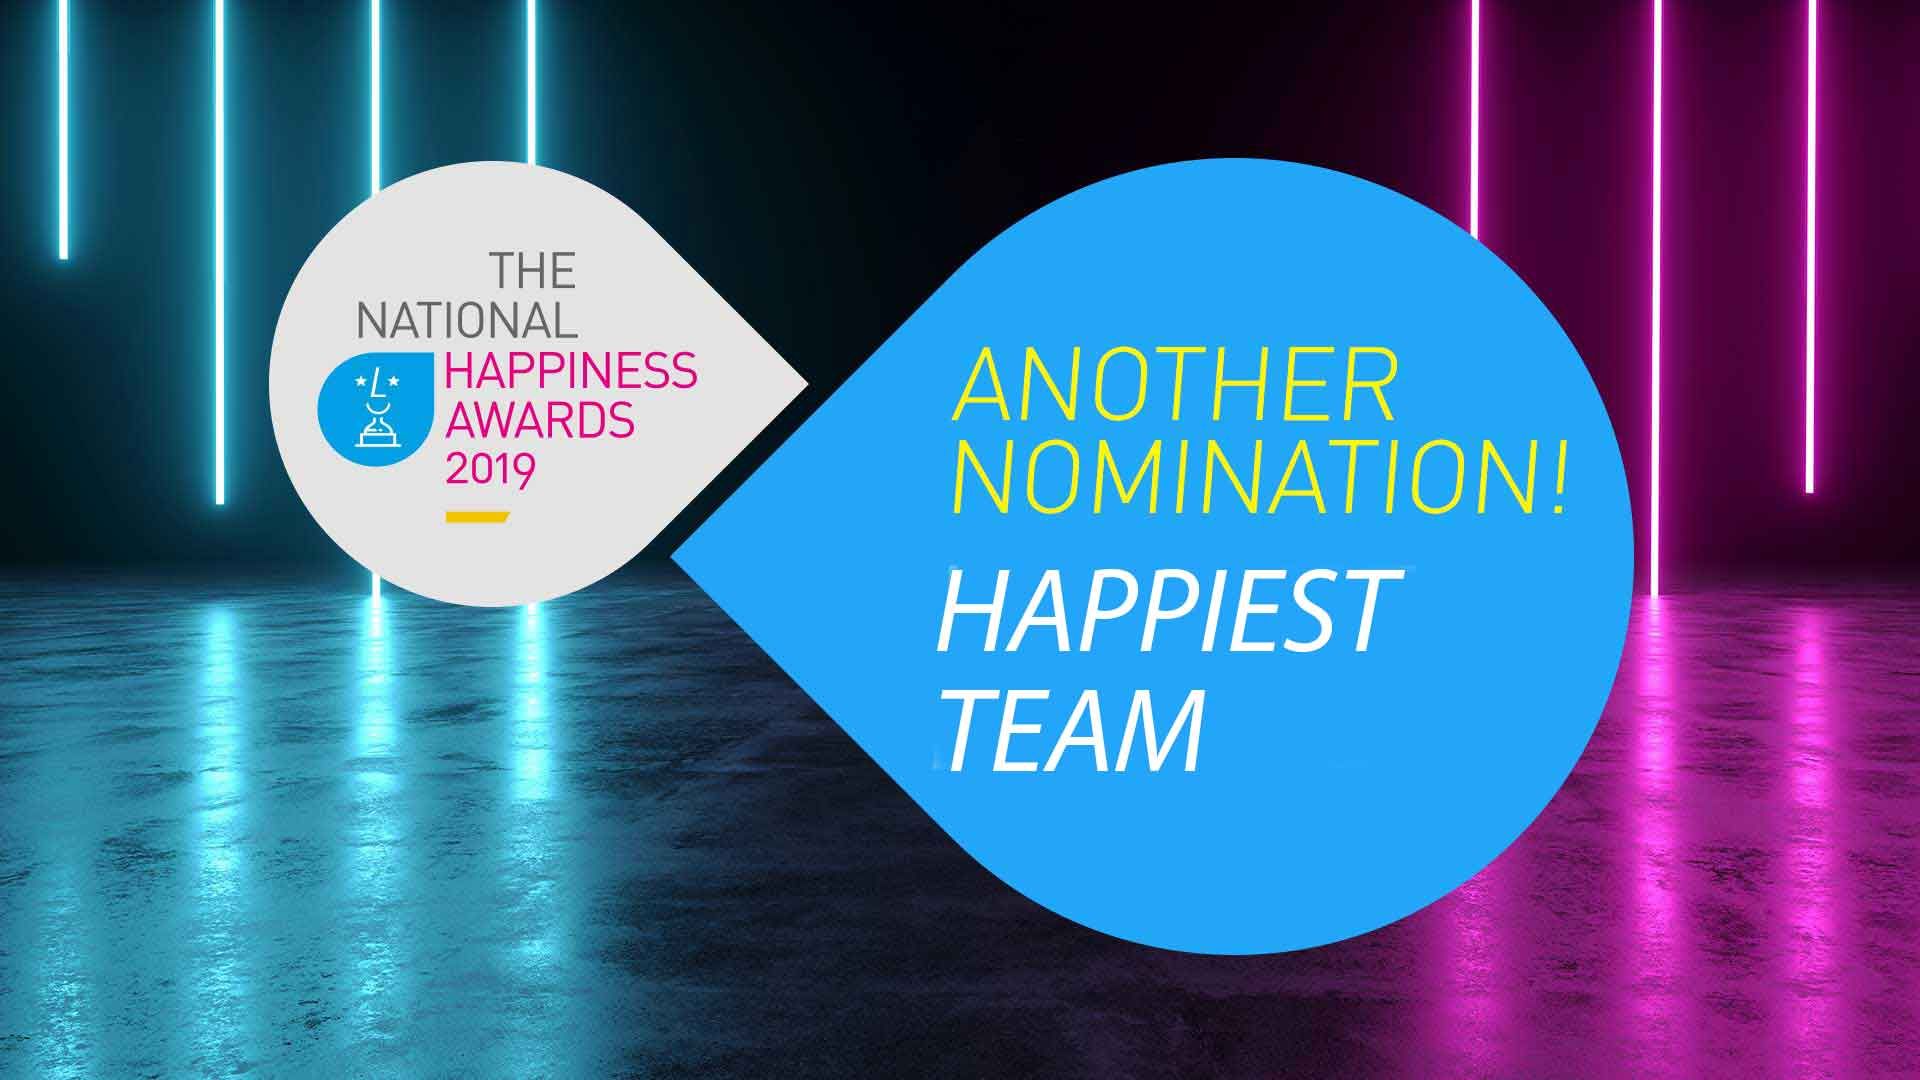 Happiest team nomination int the National Happiness Awards